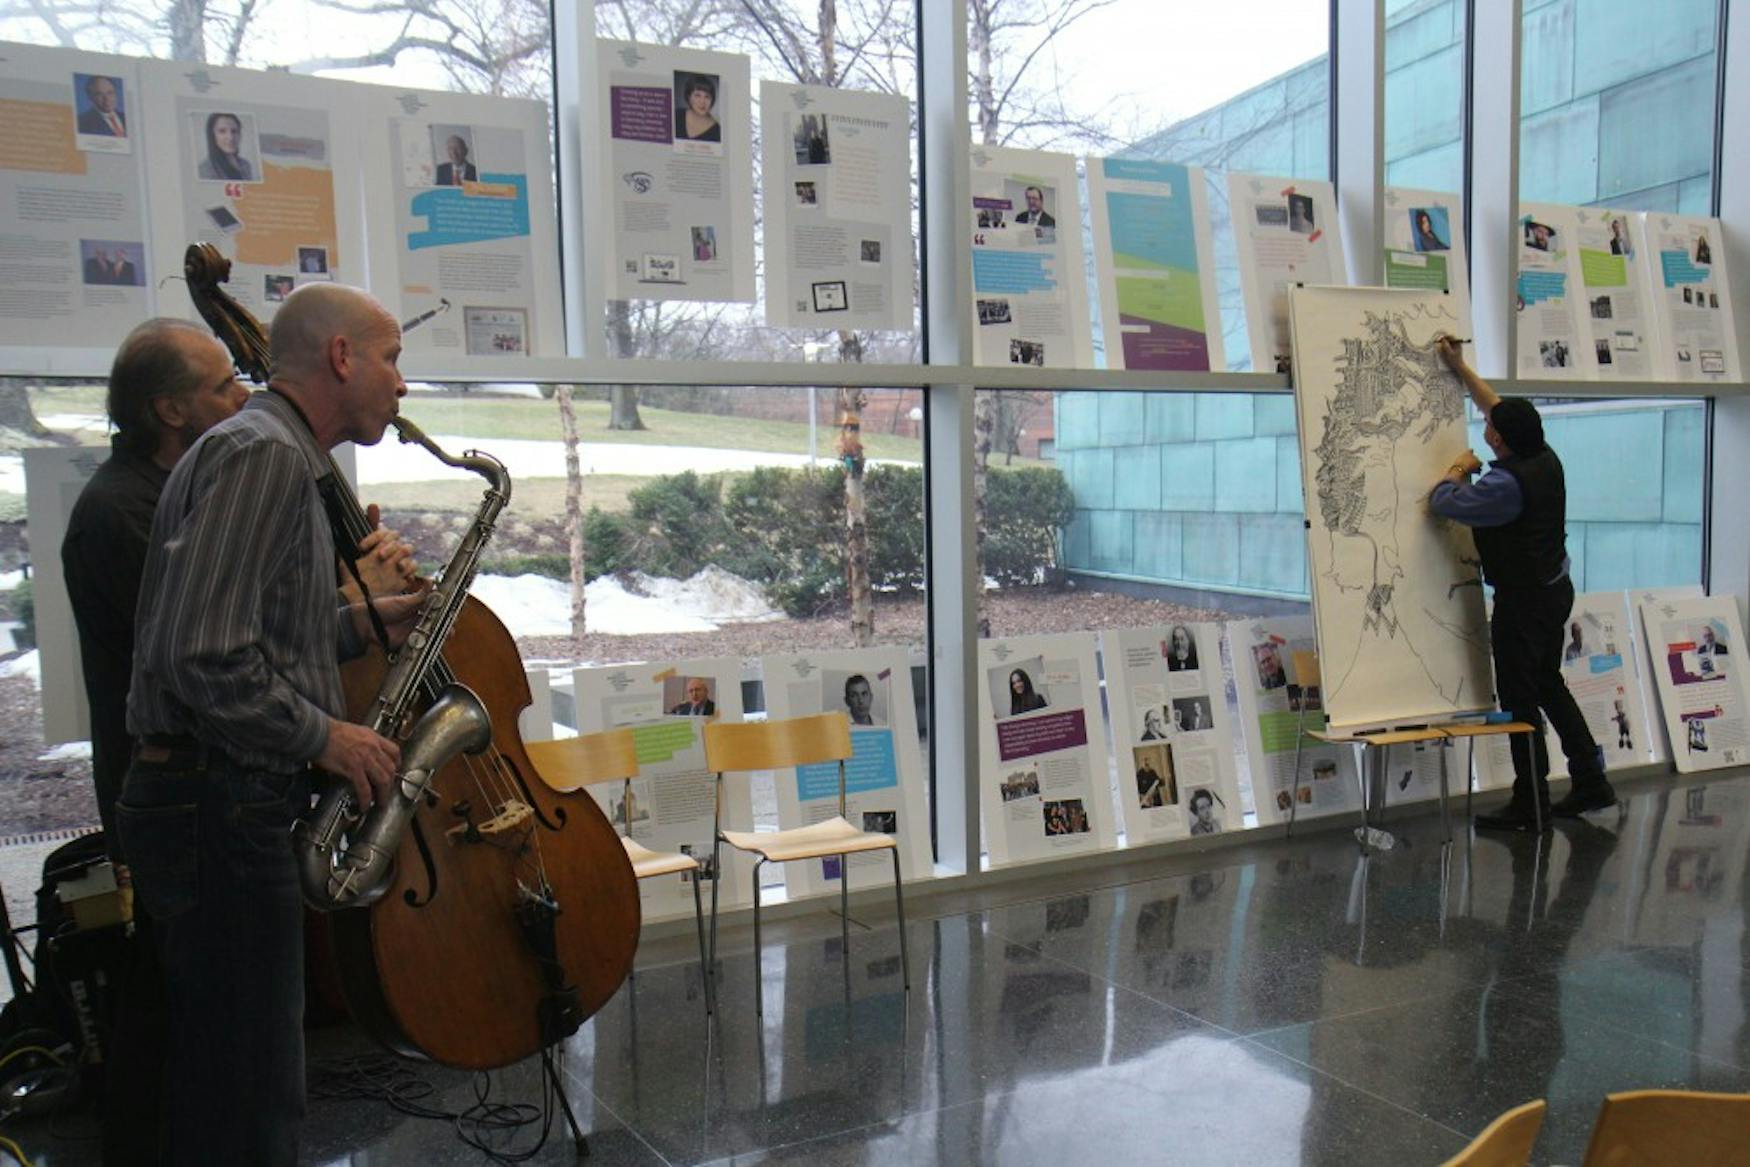 IMPROV TRIO: On Friday afternoon, three artists, Prof. Tom Hall (MUS, left), bassist Marty Ballou (left, back) and artist and musician Lennie Peterson (right) performed together, taking inspiration from each other’s work to create music and a portrait.